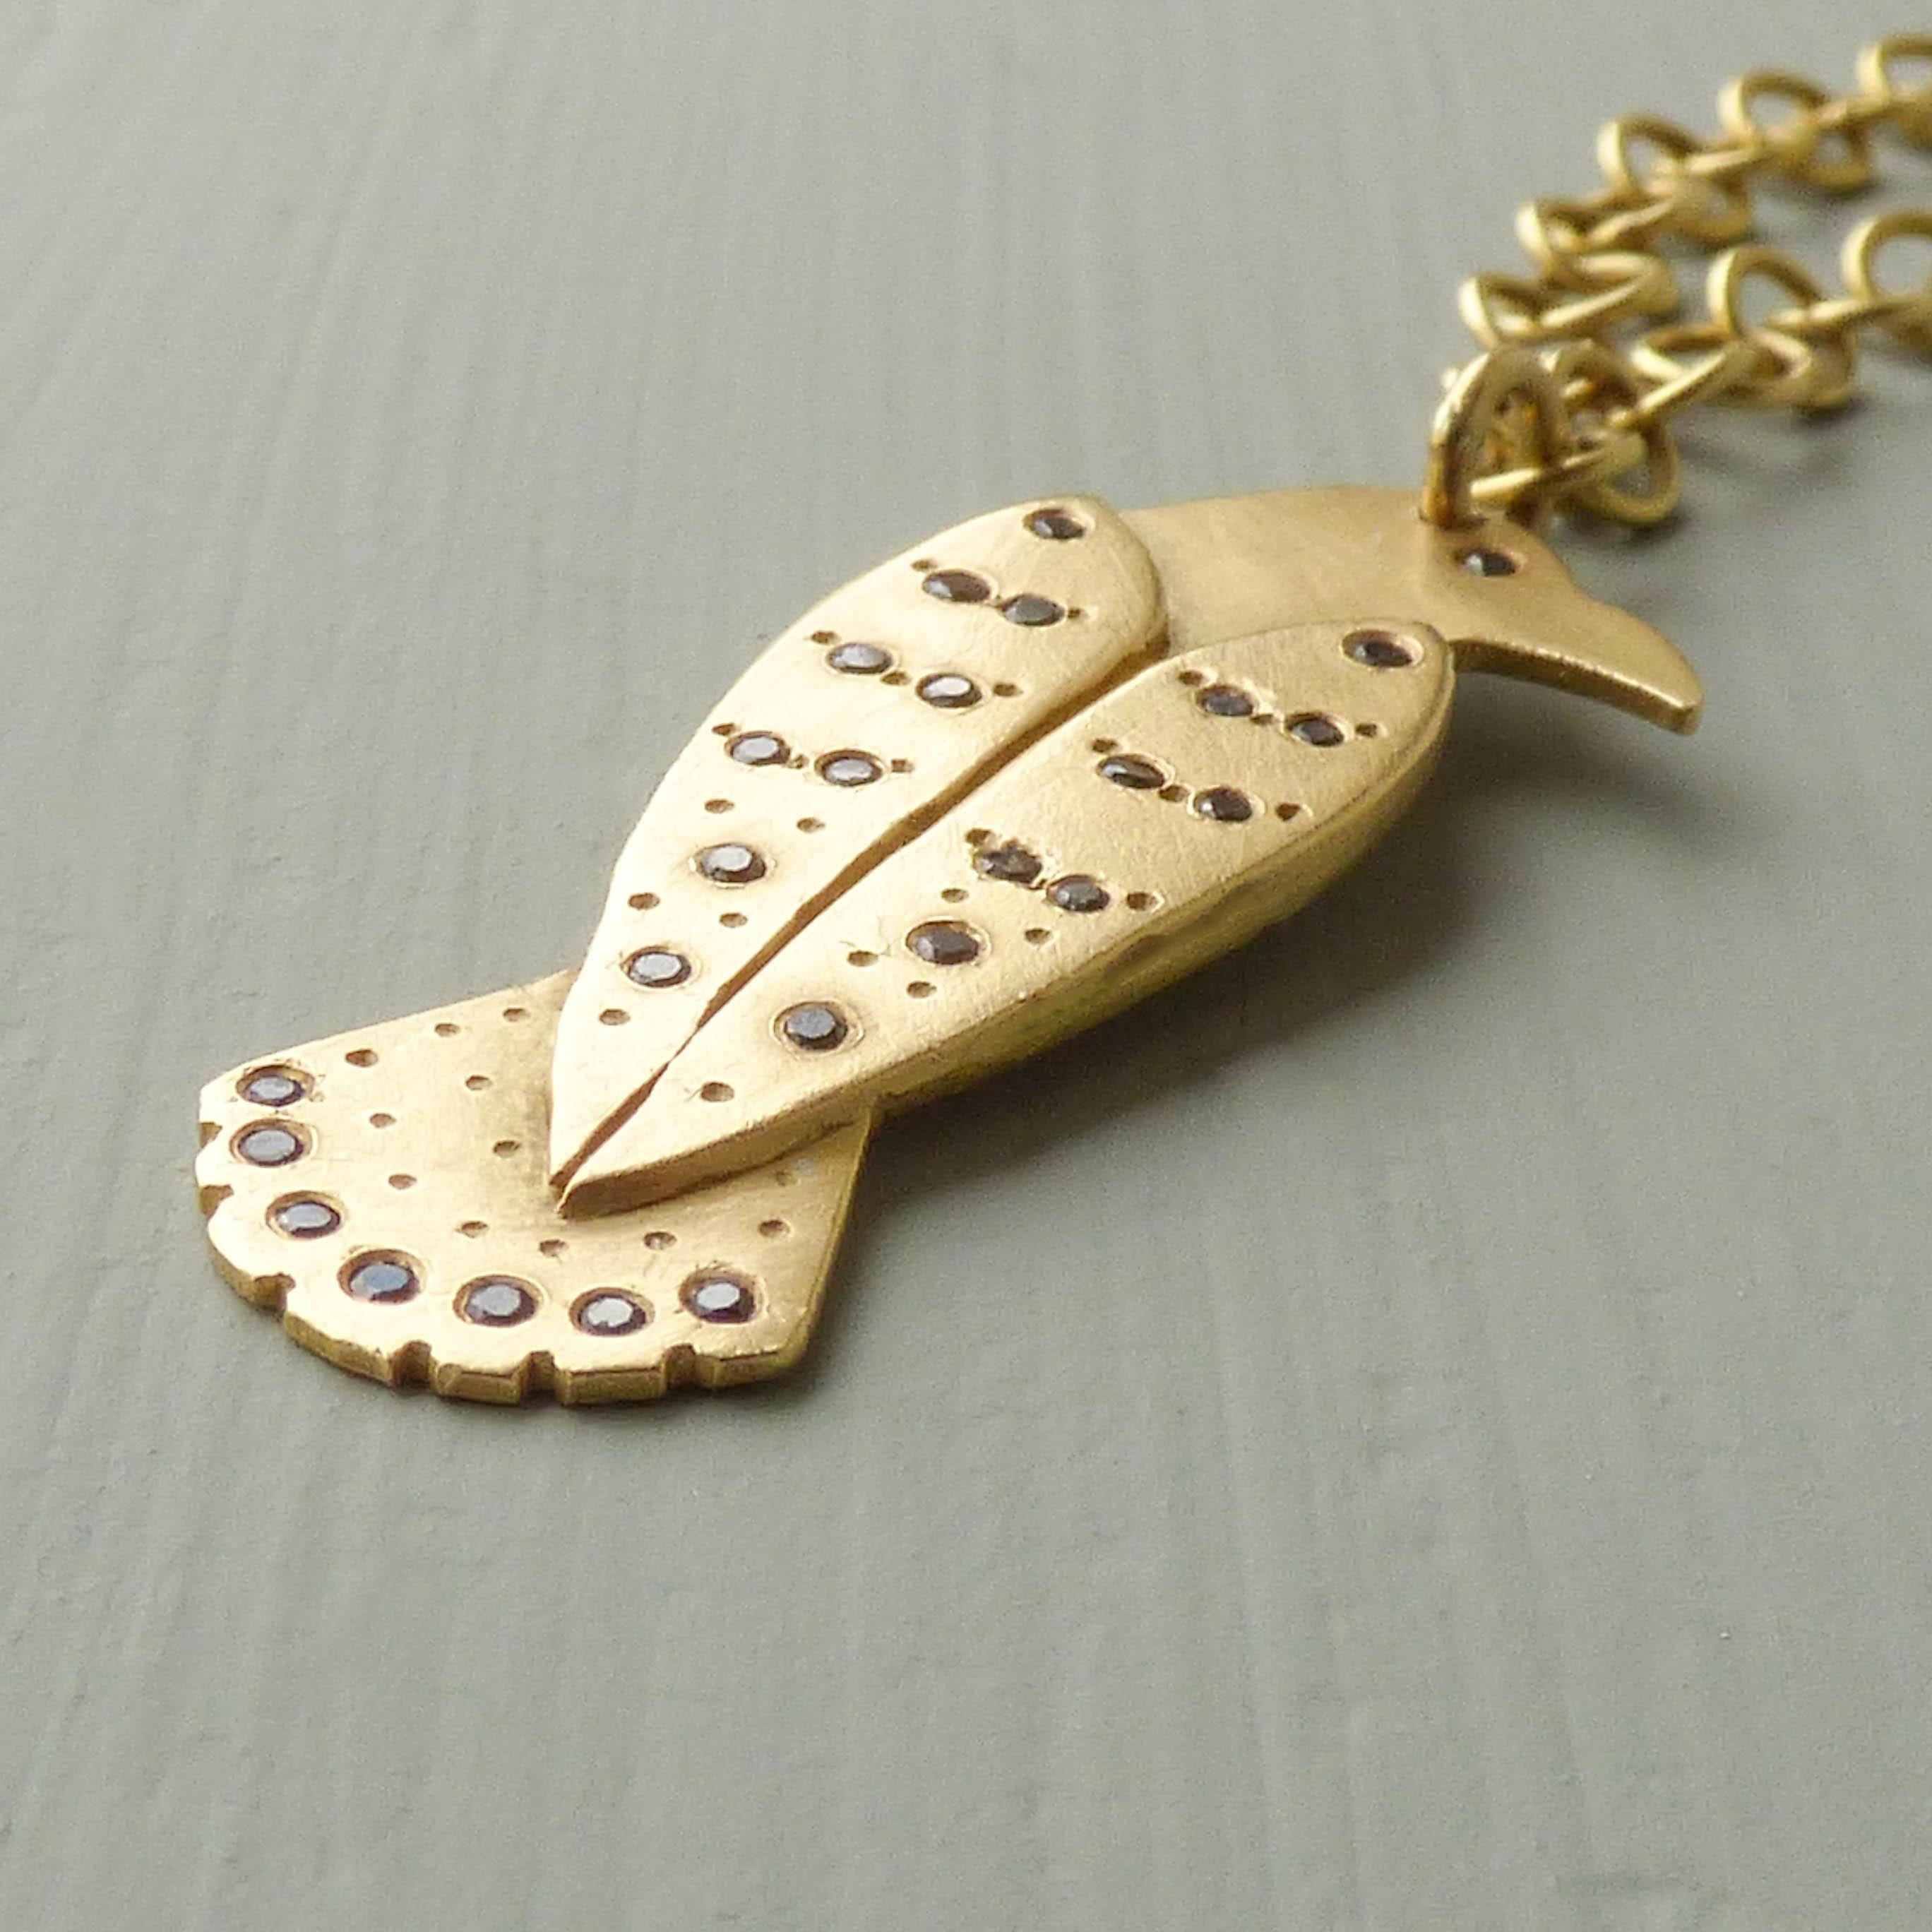 Artisan The Merla Crow Ethical Amulet Pendant 18ct Fairtrade Gold and Black Diamonds For Sale